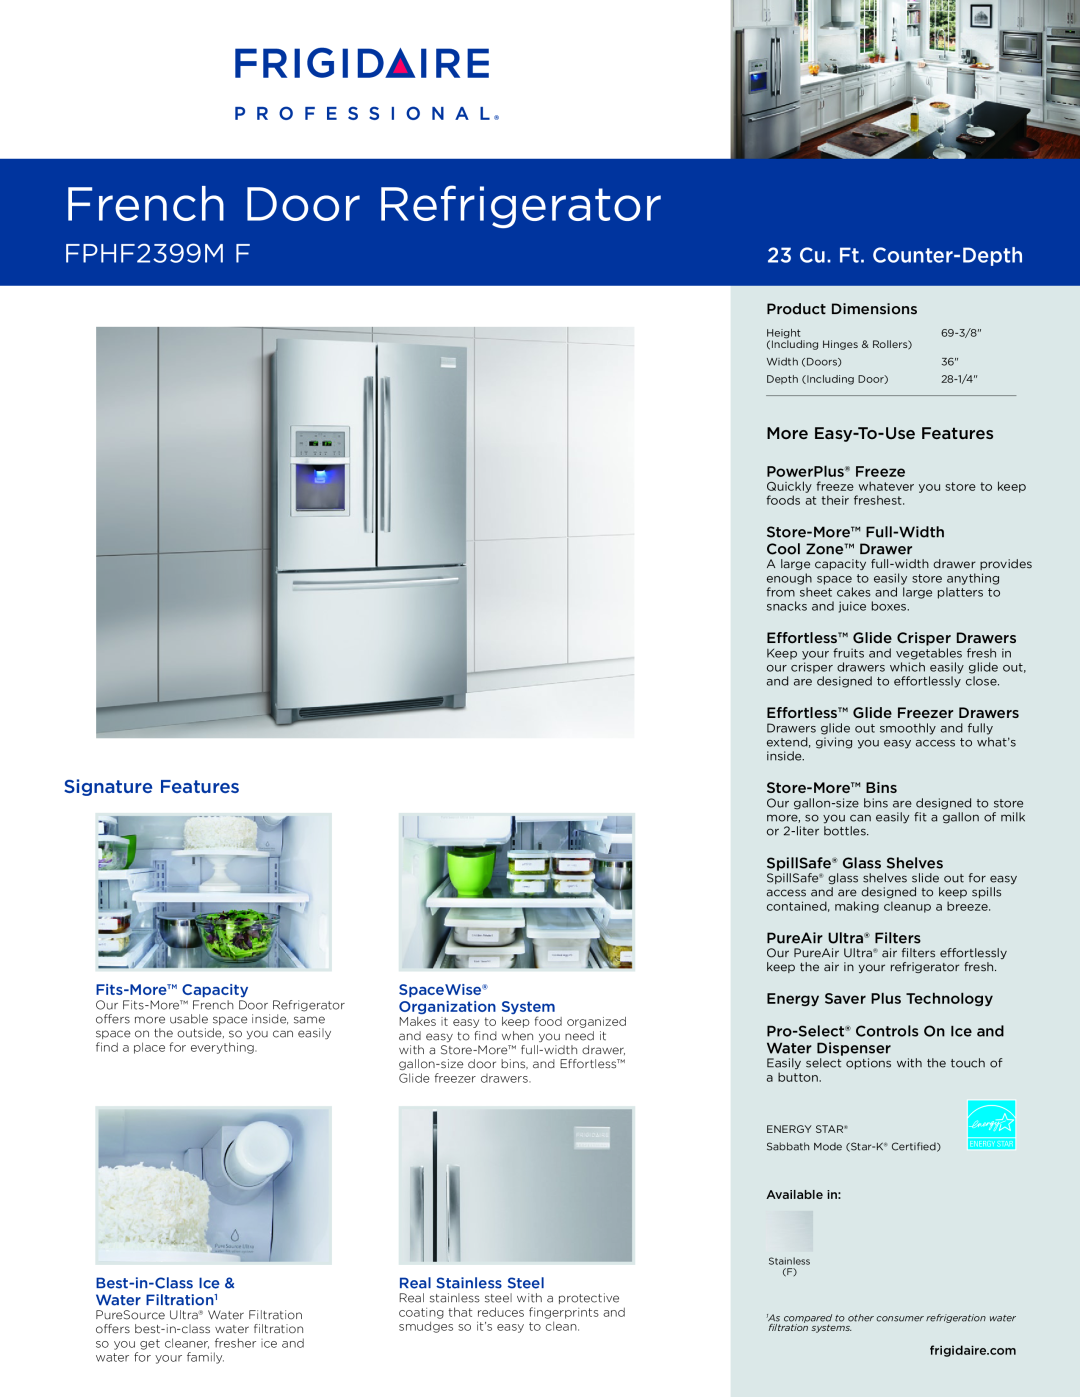 Frigidaire FPHF2399M F dimensions Fits-More Capacity, SpaceWise, Organization System, Best-in-Class Ice, Water Filtration 